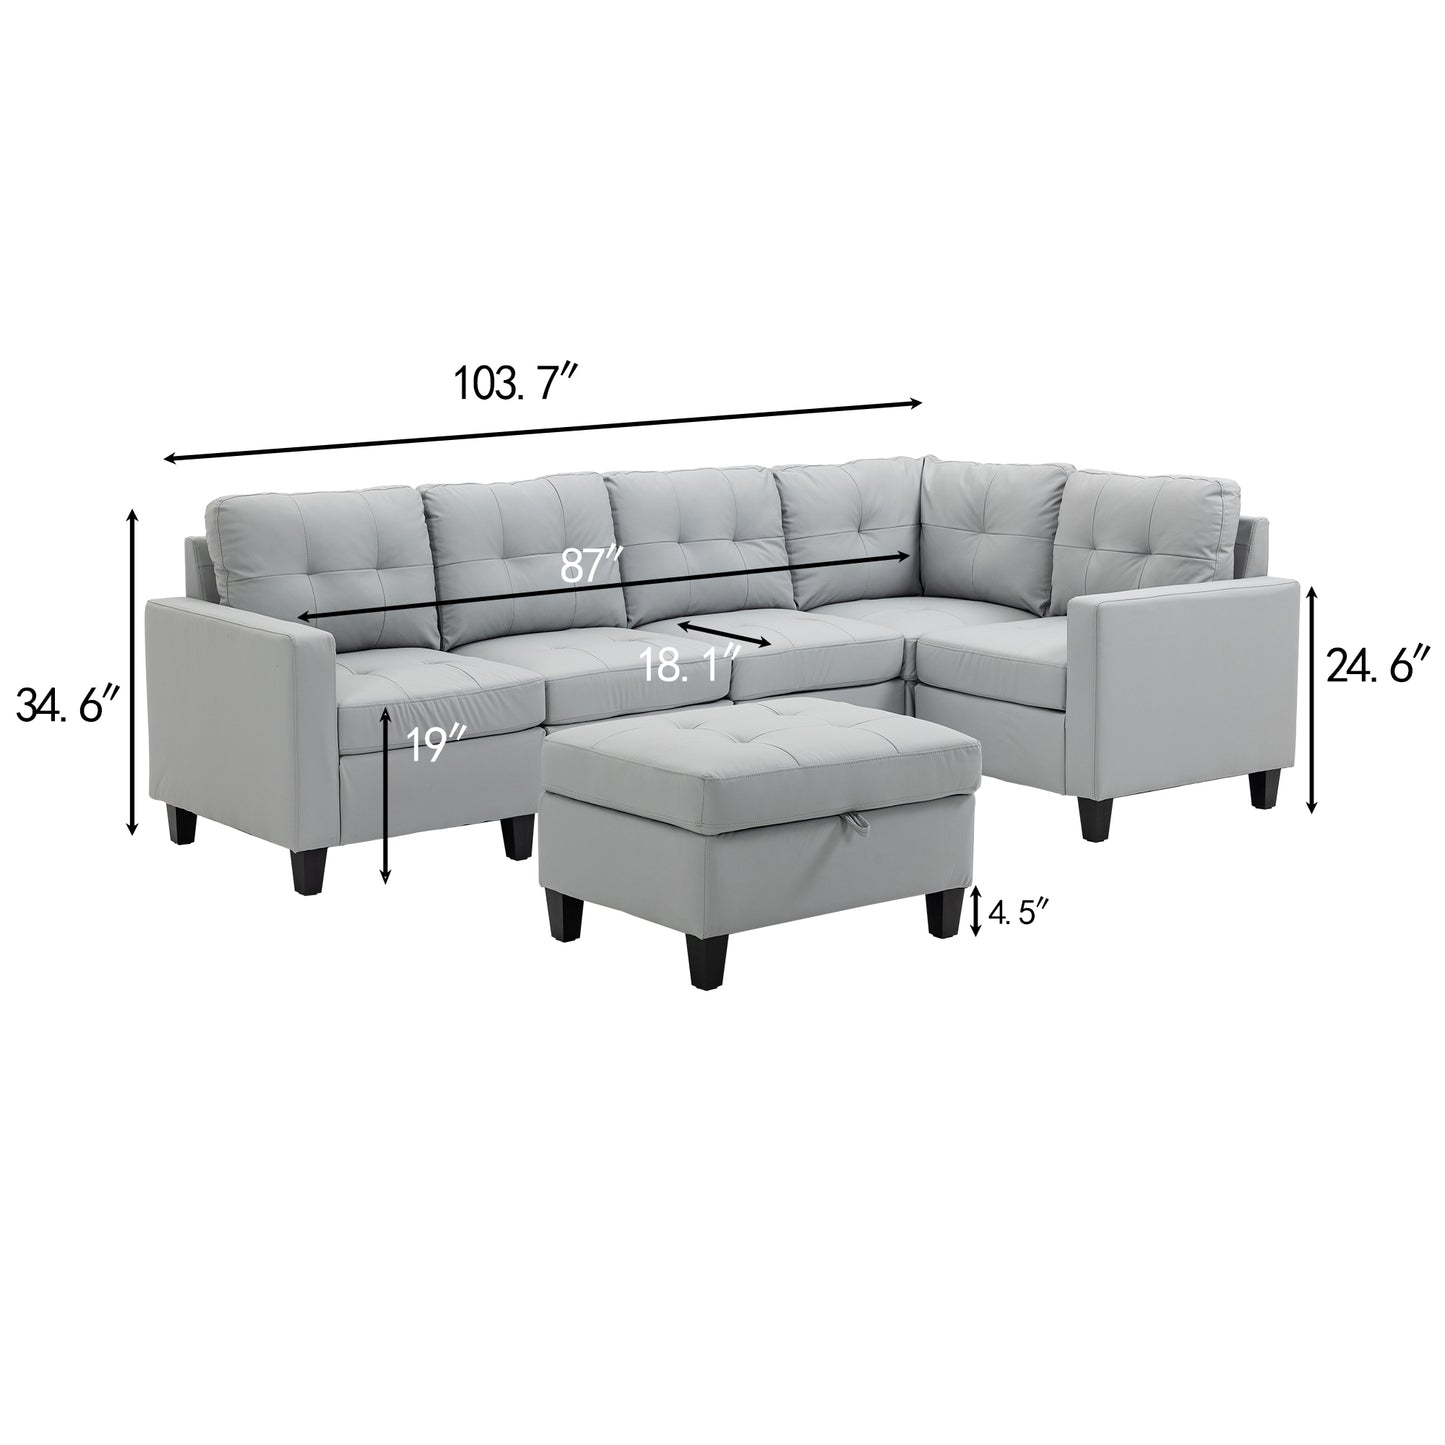 Modular Sectional Sofa Assemble Modular Sectional Sofas Bundle Set Cushions, Easy to Assemble Left & Right Arm Chair,Corner Chair, Ottomans Table